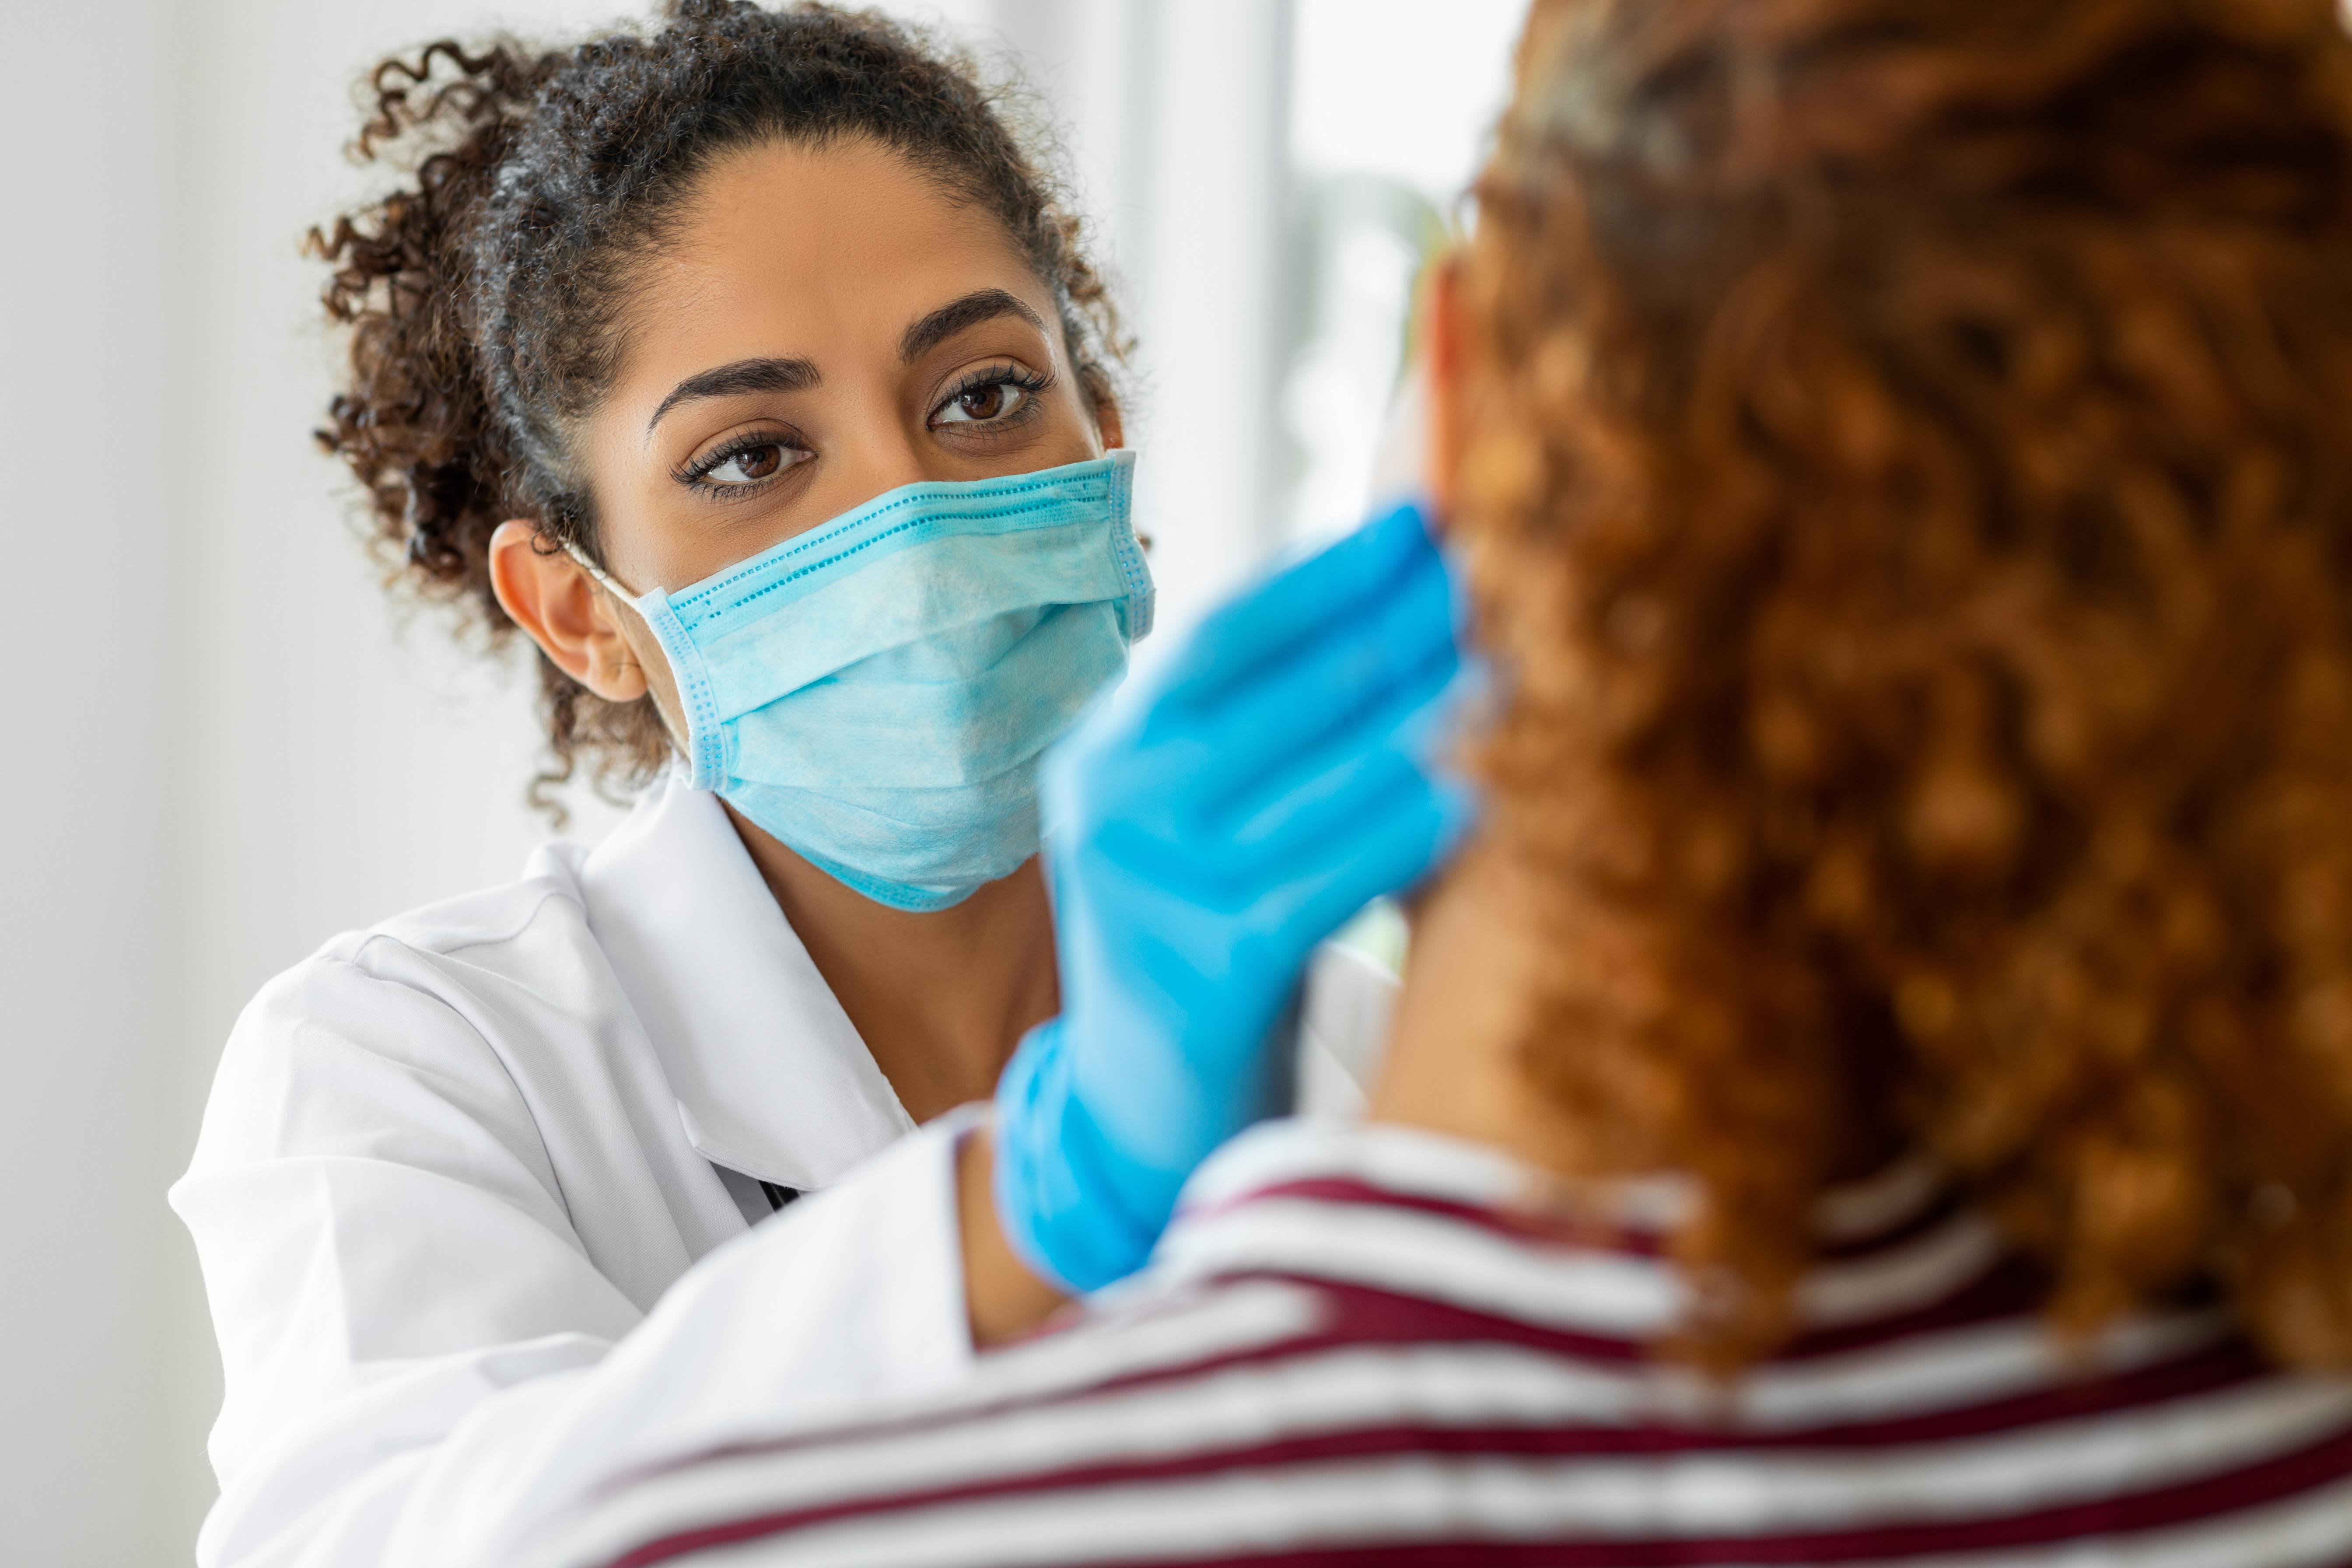 Doctor wearing a mask and gloves examines a patient.